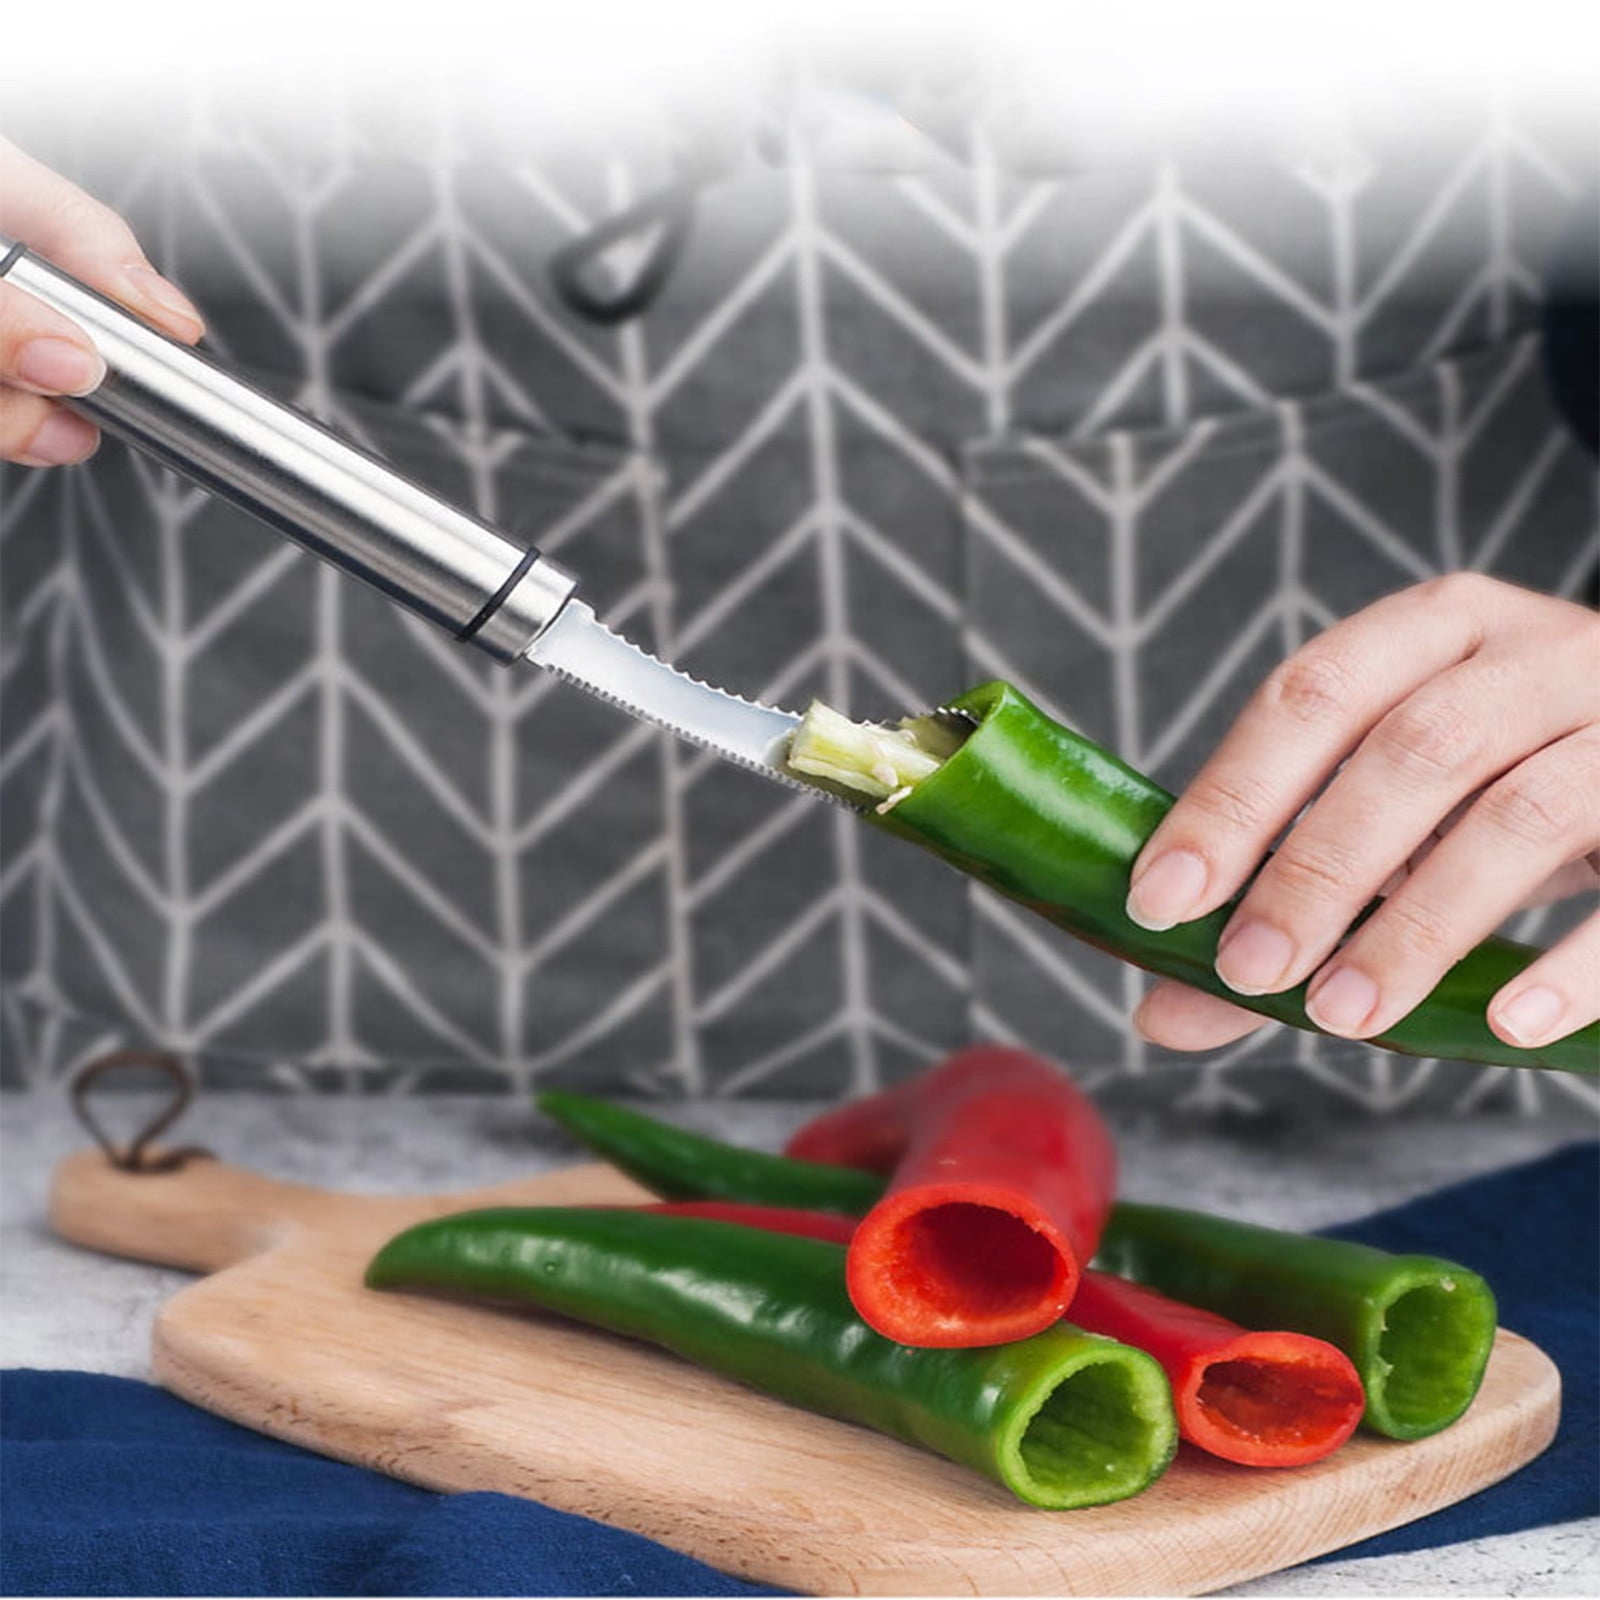 Pepper Seed Remover Jalapeno Chili Pepper Cutter Seeder Tomato Fruit And  Vegetable Corer Slicer 2Pcs Kitchen Creative Gadget